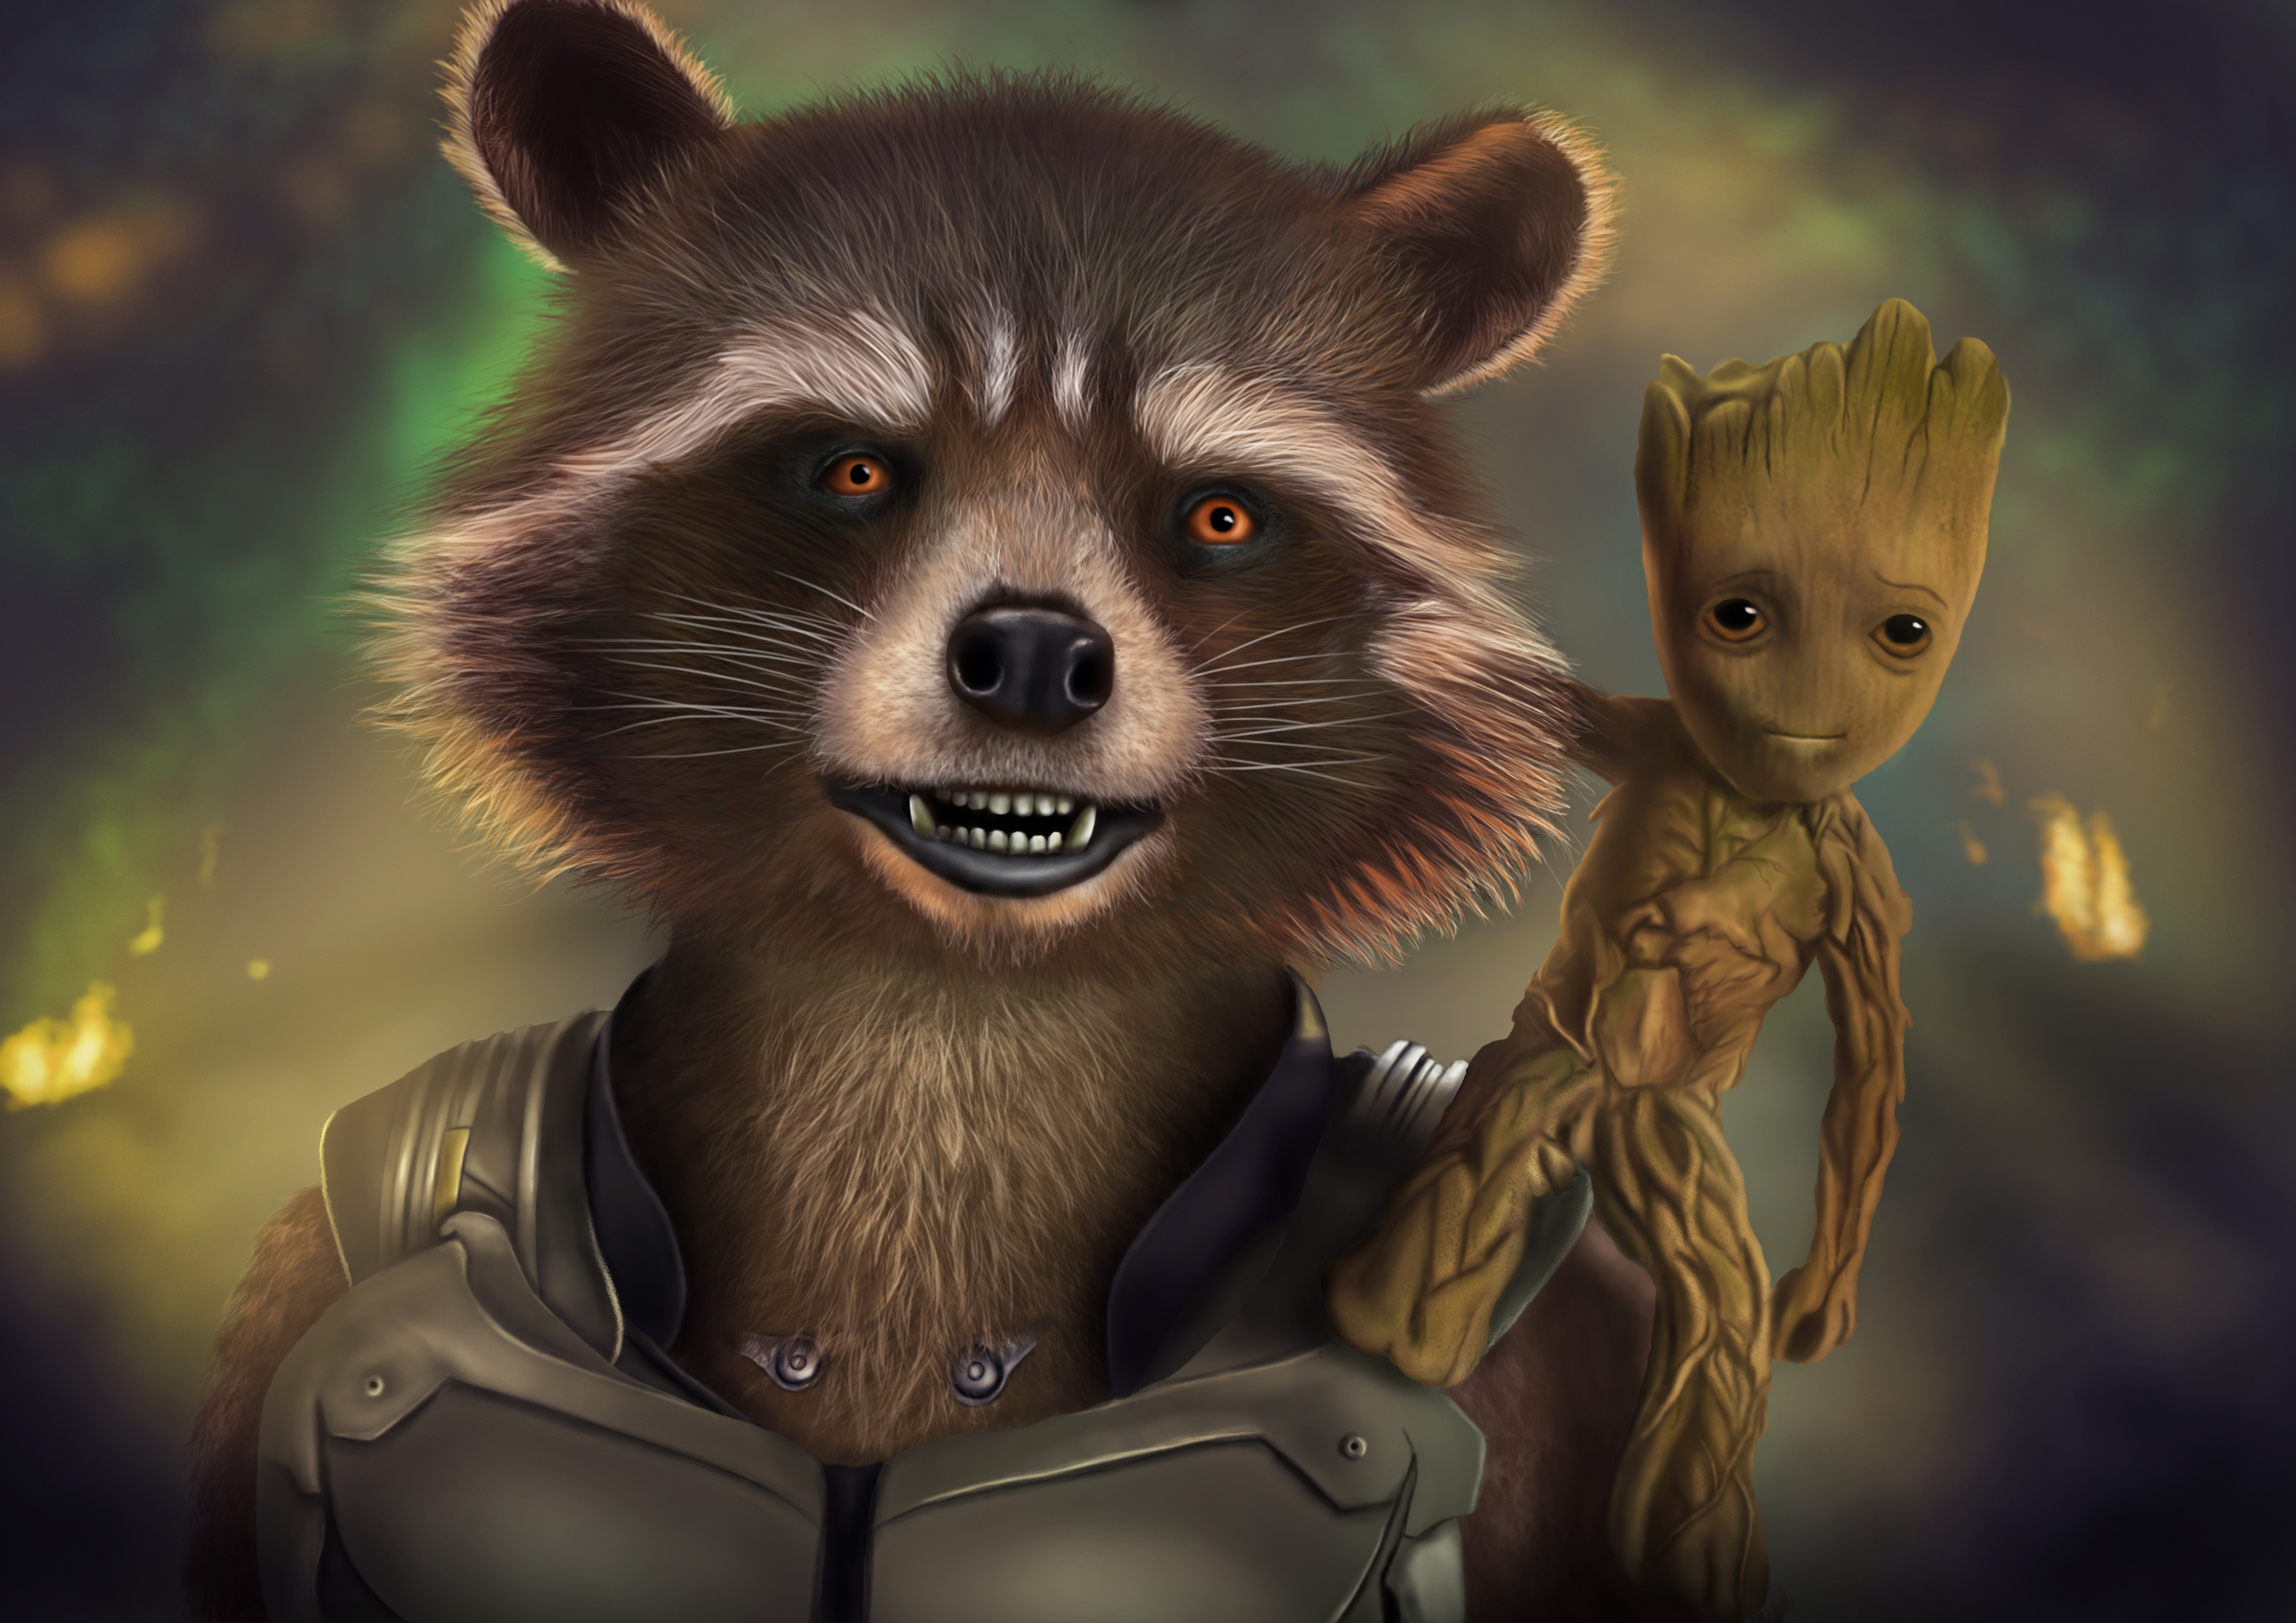 Rocket And Baby Groot Artwork, HD Superheroes, 4k Wallpapers, Images, Backgrounds, Photos and